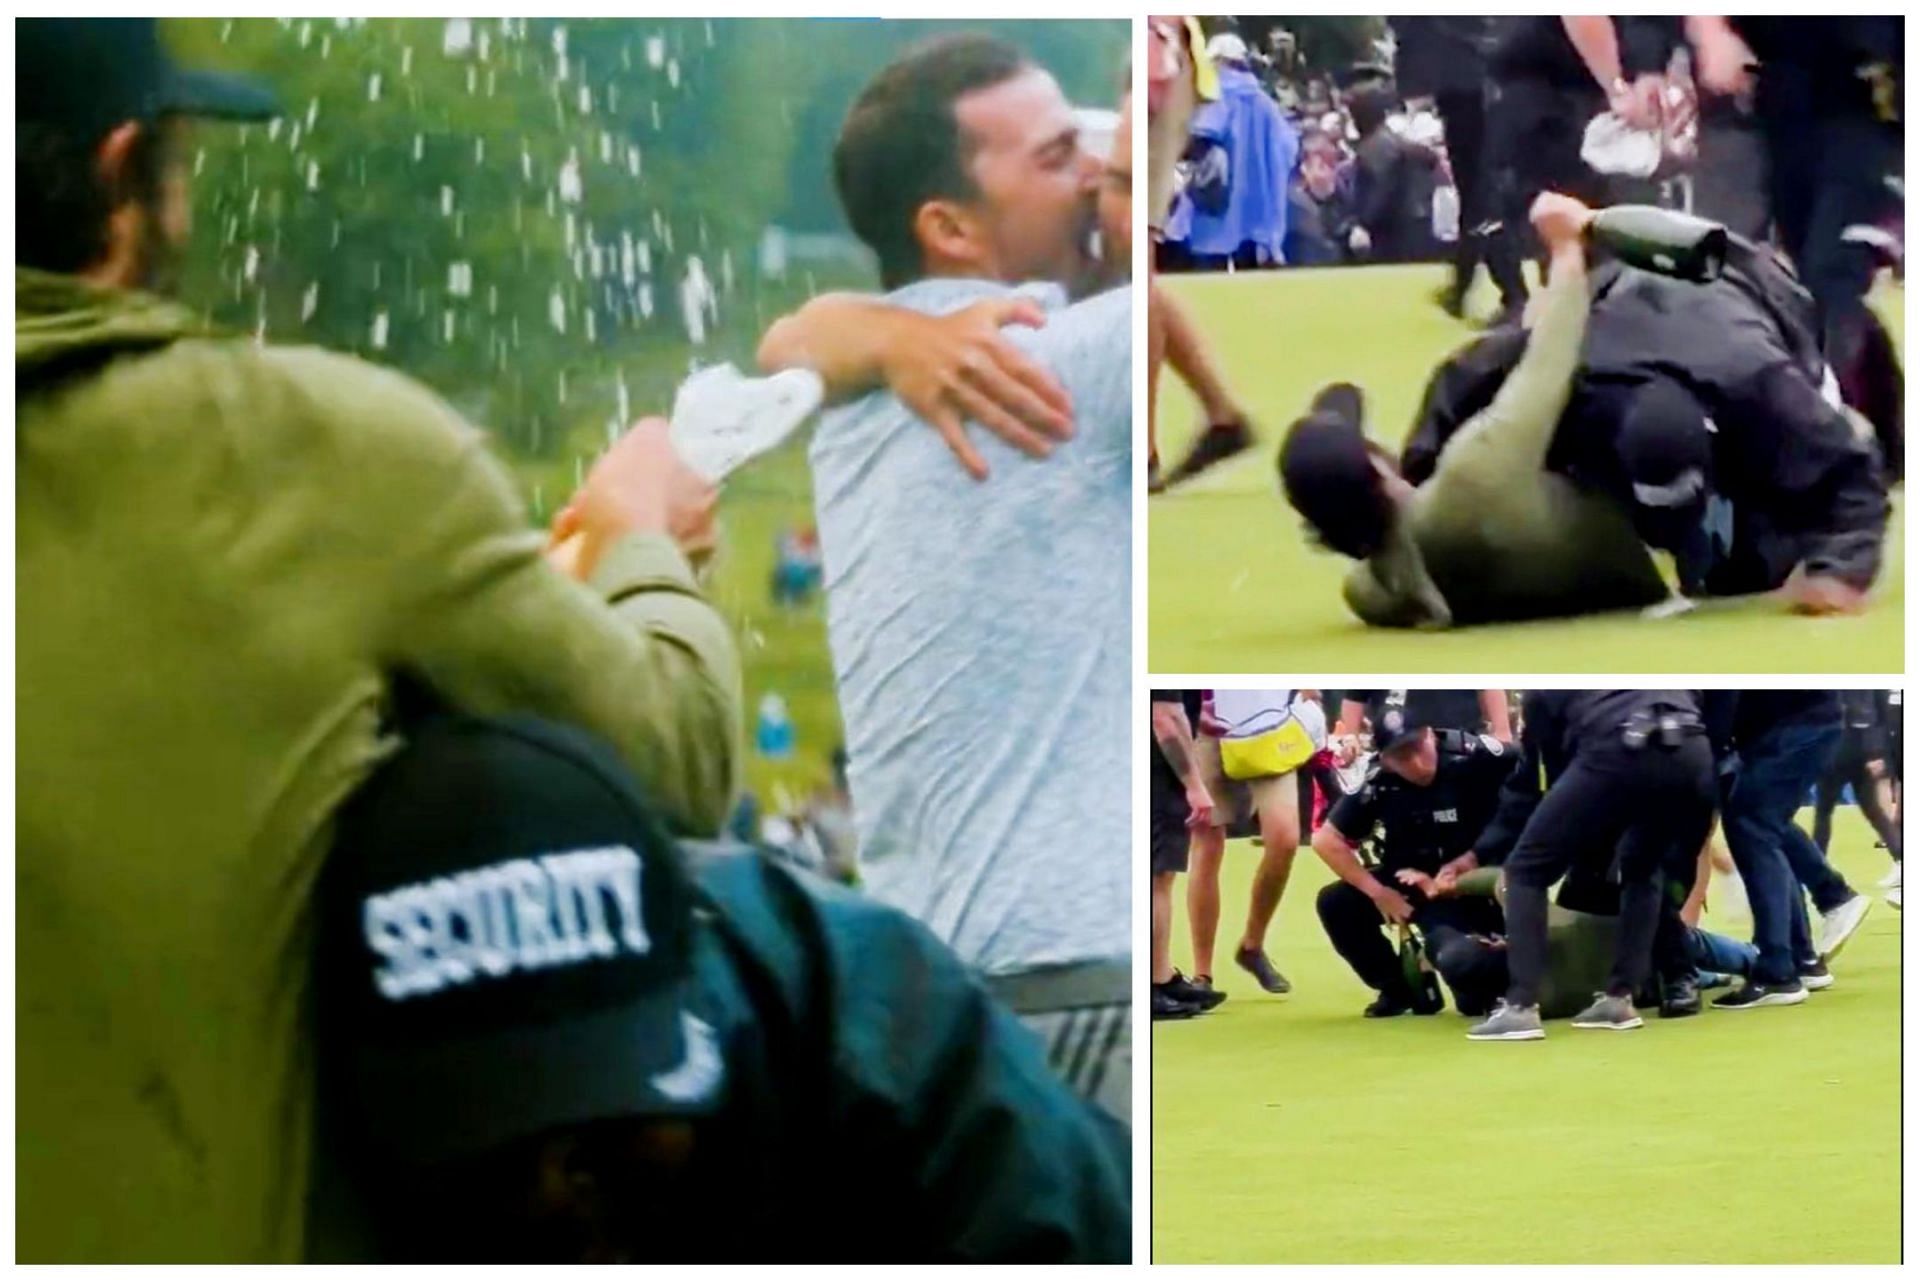 Adam Hadwin was pushed away by security personal at the RBC Canadian Open